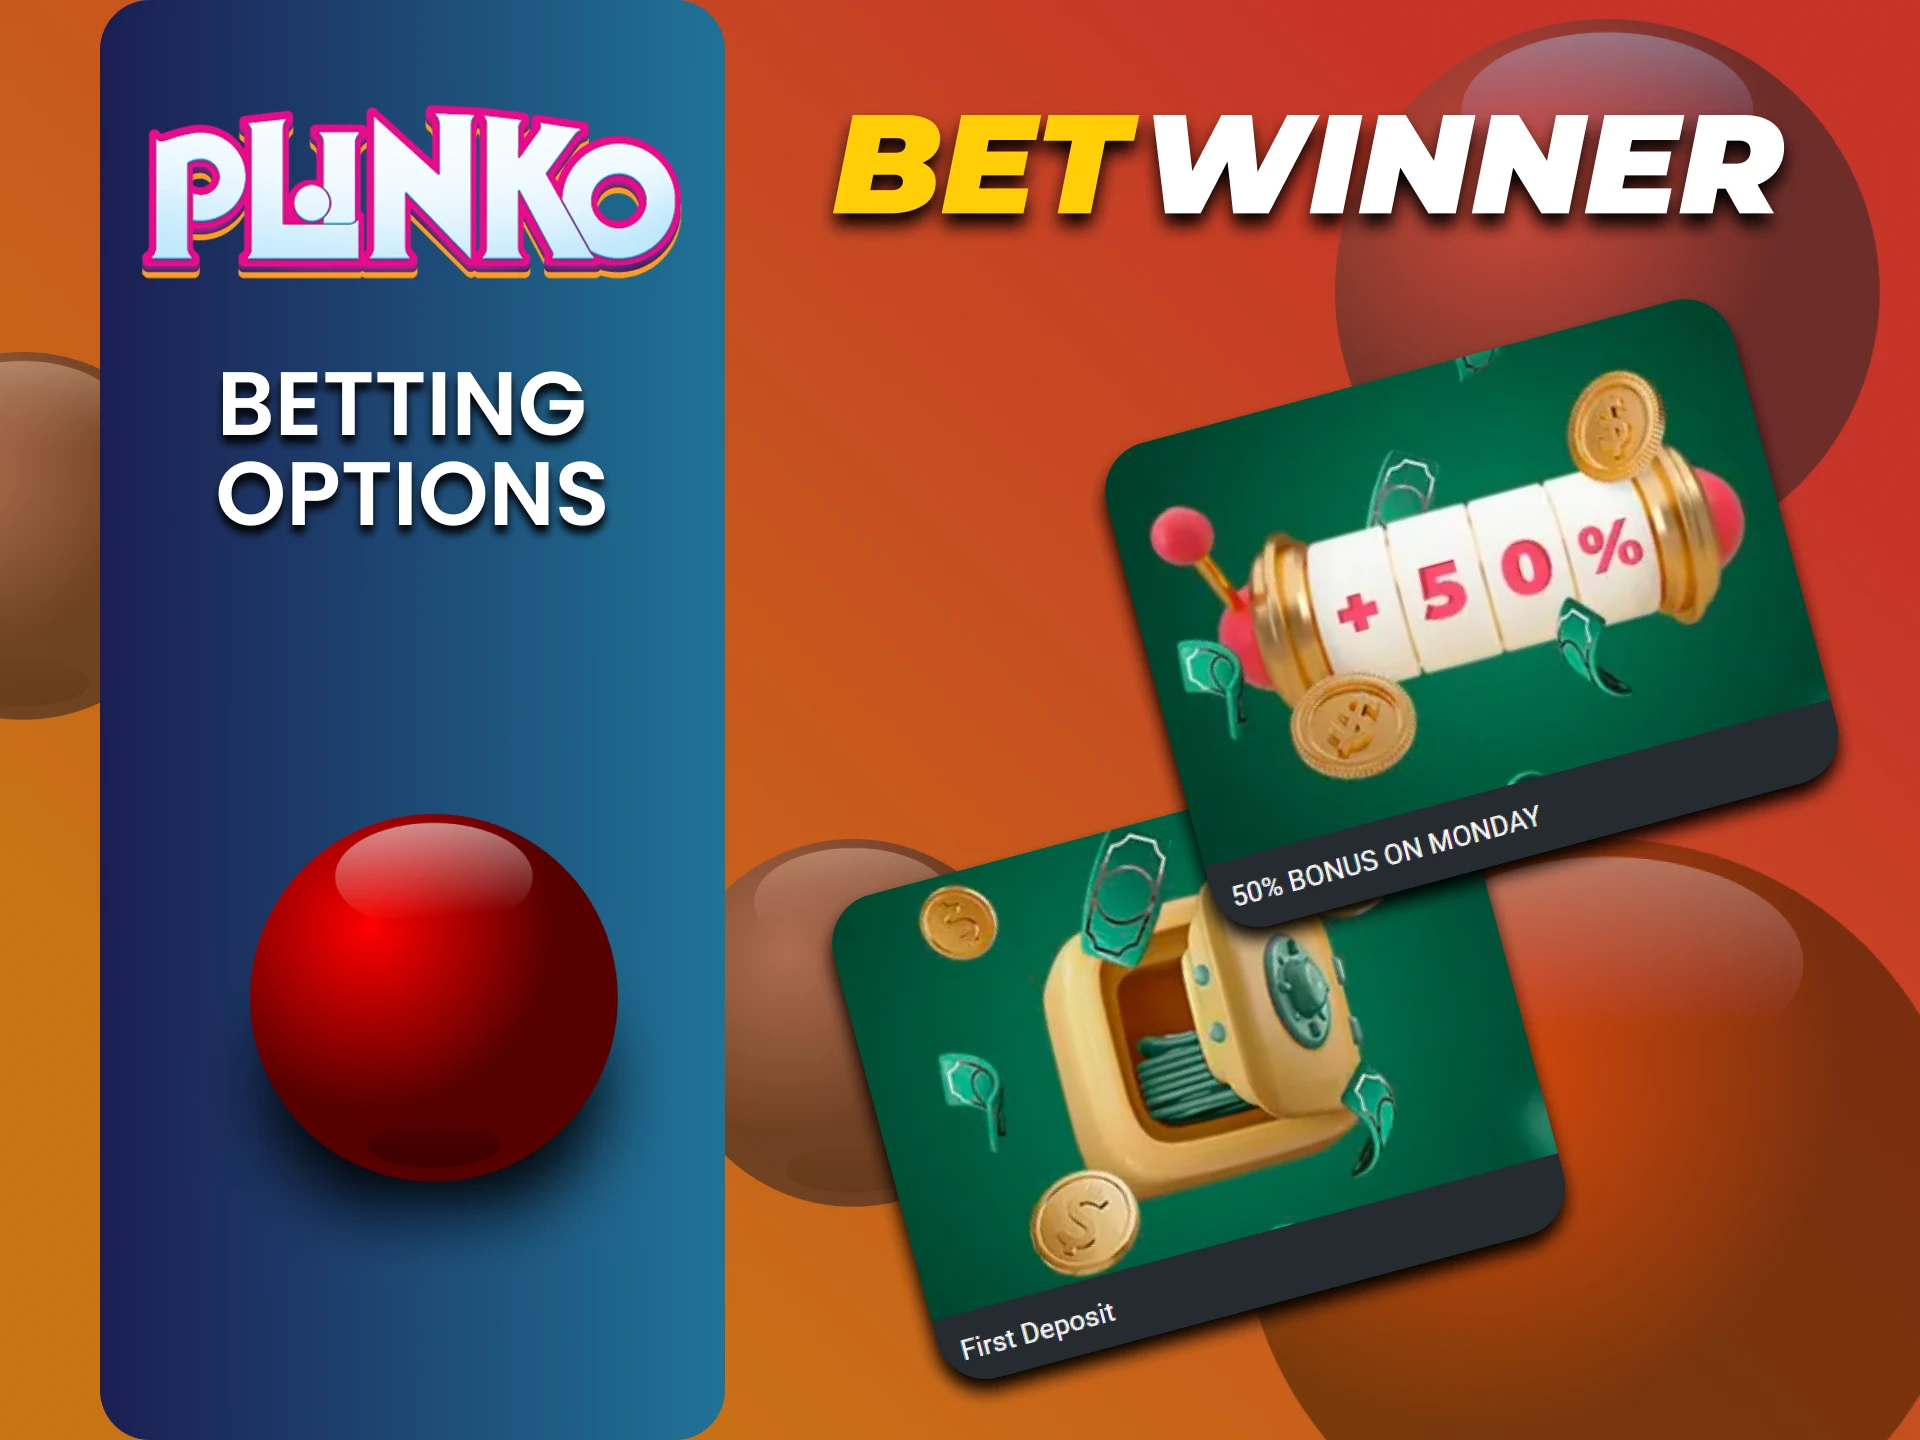 Get a bonus for playing Plinko from Betwinner.